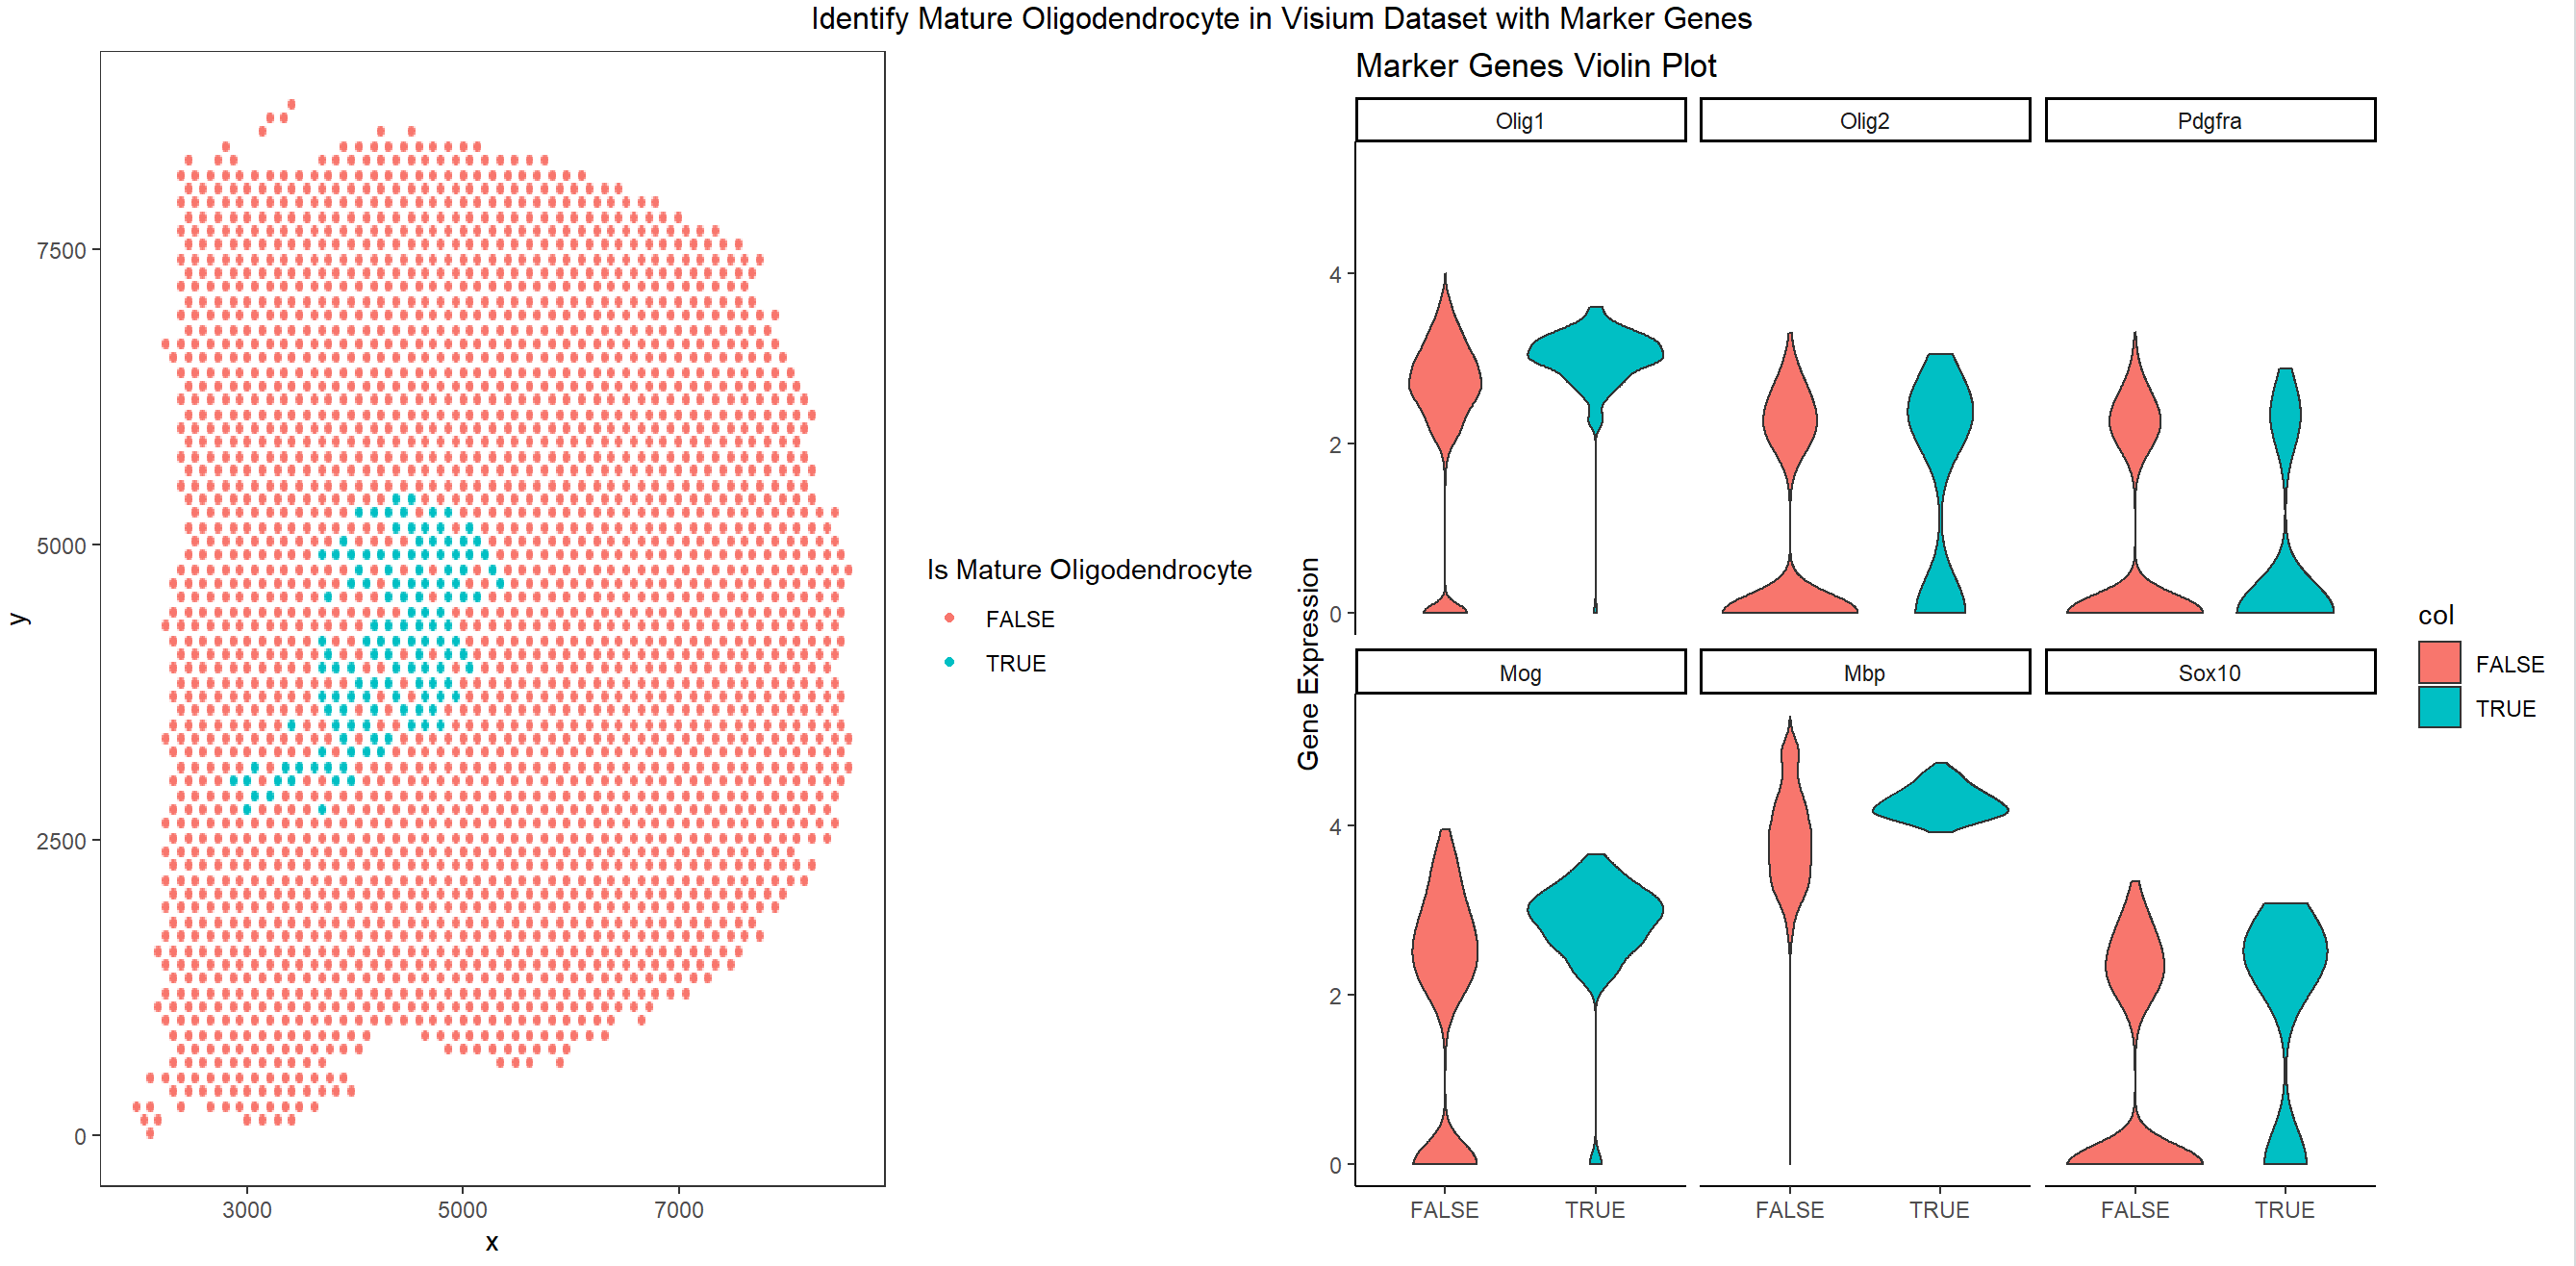 Visualization of Spatial Distribution of Mature Oligodendrocyte with Marker Genes